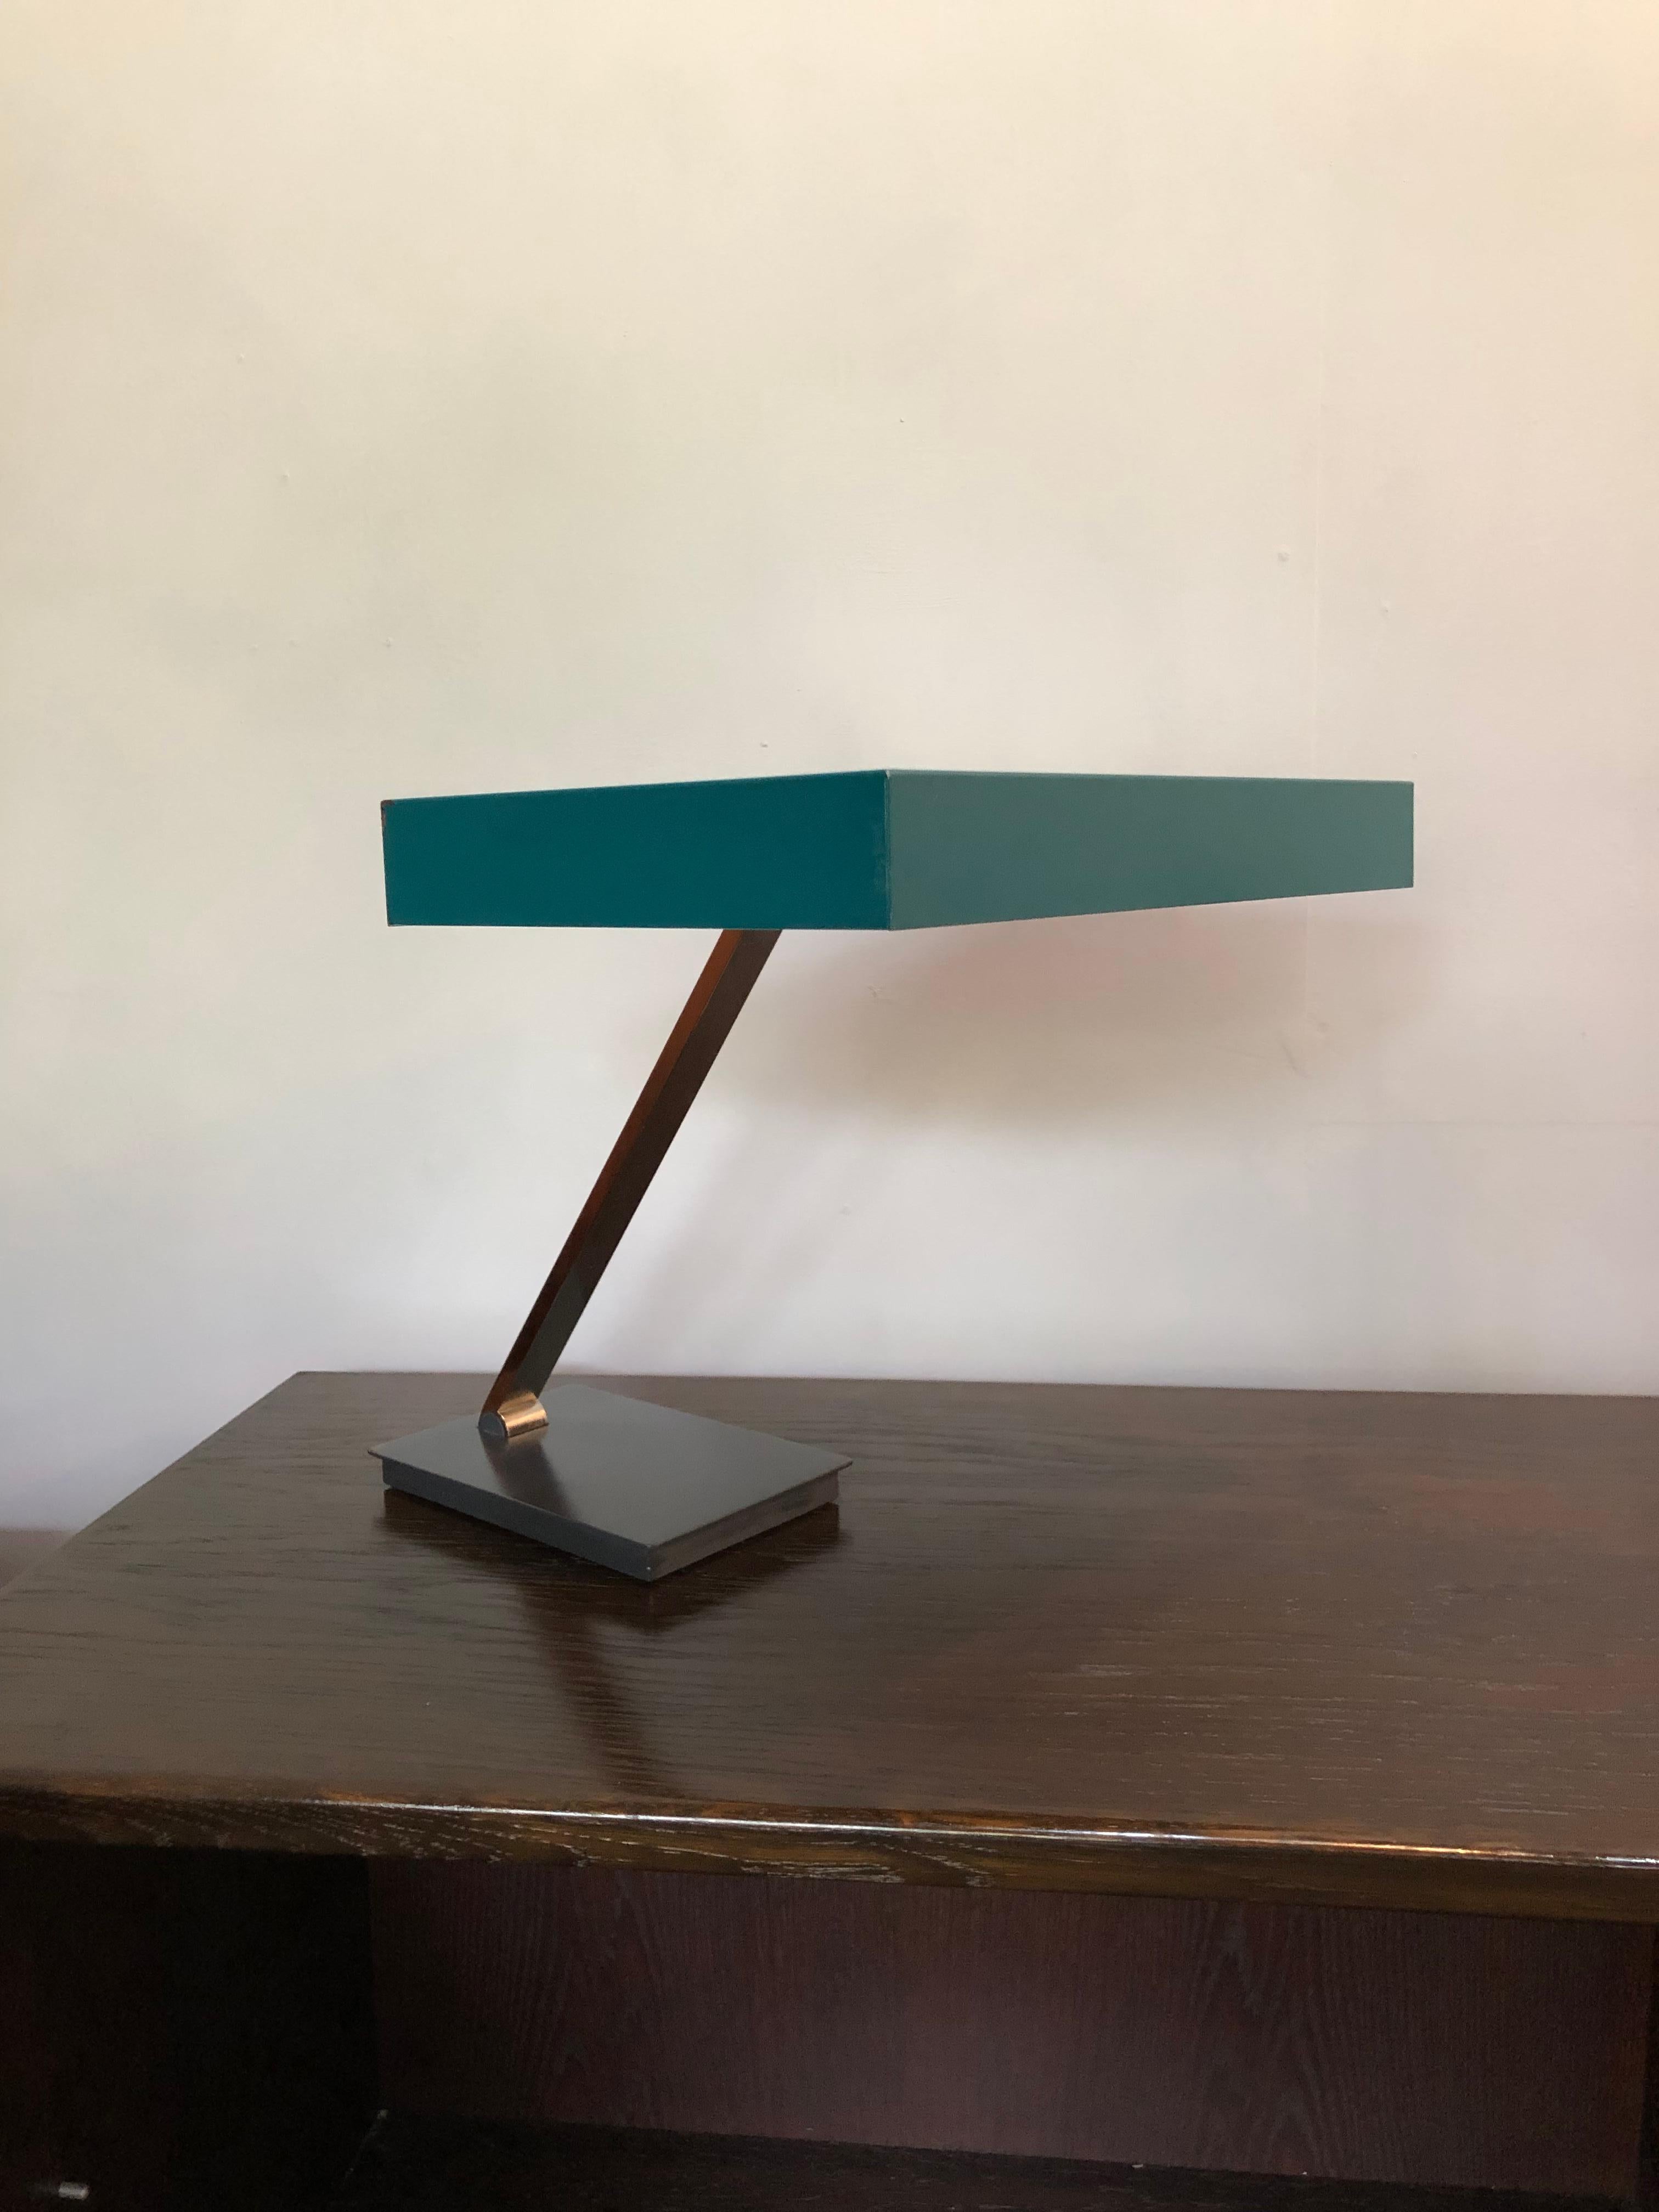 Extremely rare Bauhaus Minimalist lamp by Kaiser Leuchten, 1950s. Heavy cast iron base with adjustable chrome stem to the painted steel rectangular hood. Stunning piece of lighting design and a beautiful color. Rewired.